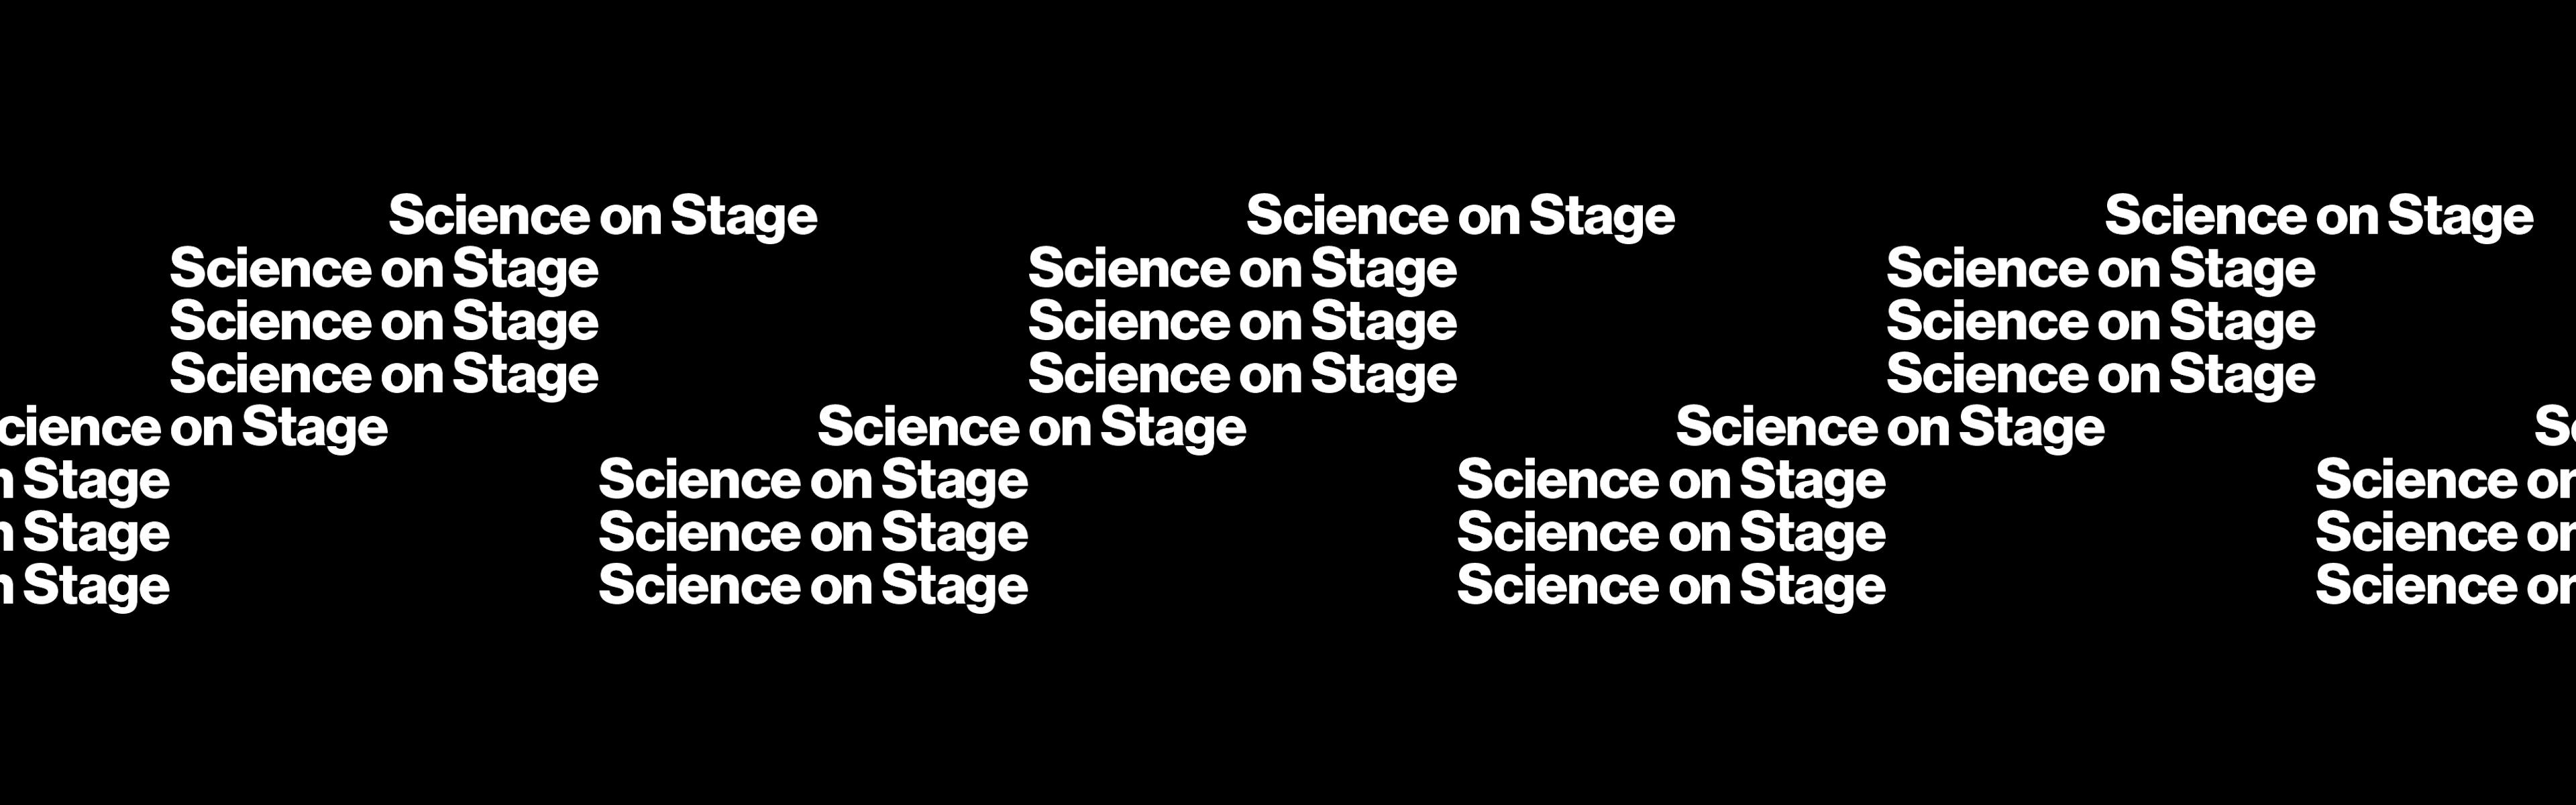 "Science on Stage" repeating text